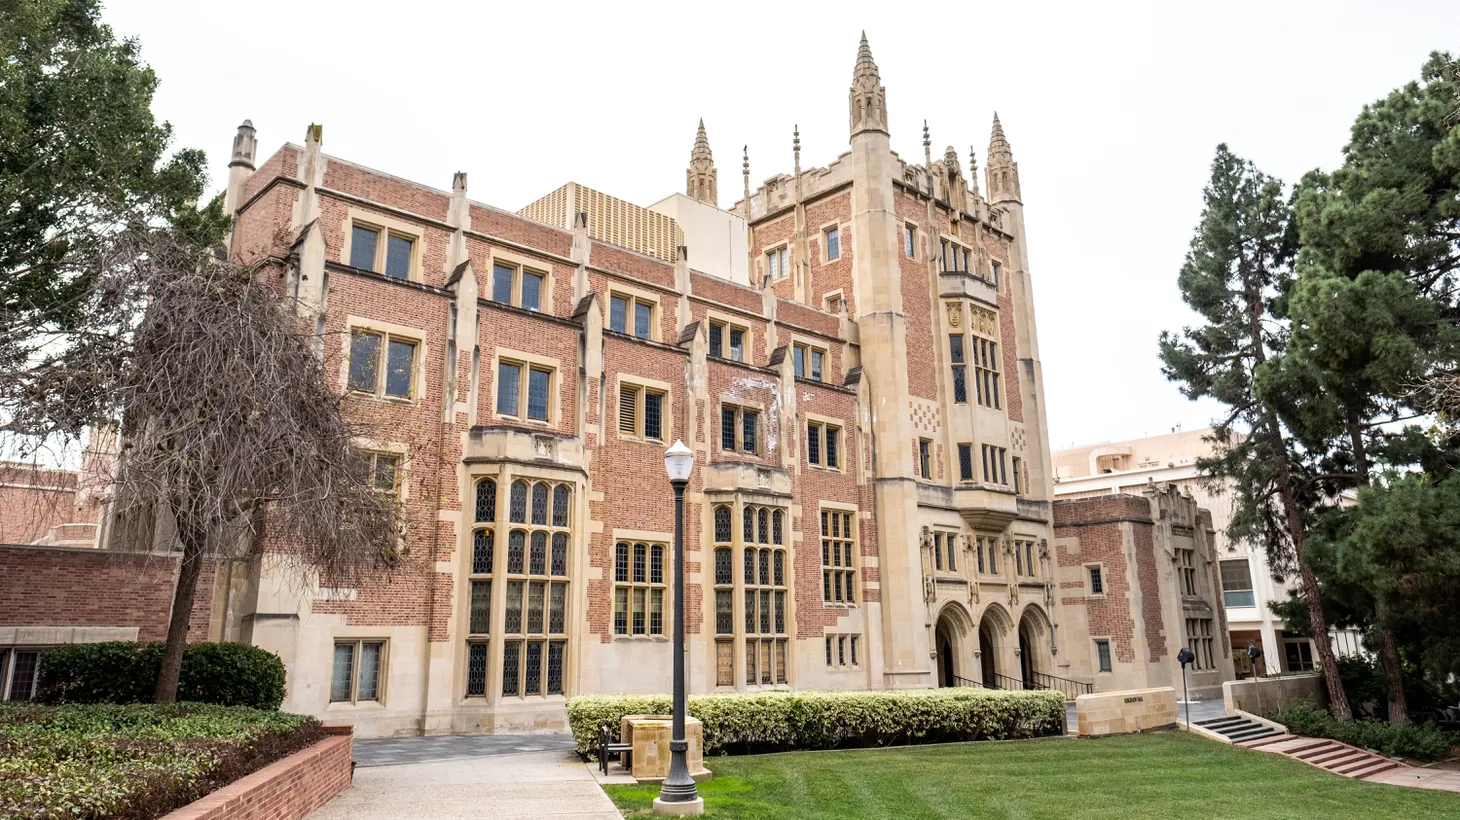 Kerckhoff Hall sits on the campus of UCLA. The University of California system says it will waive tuition fees for Native American students who are members of a federally recognized tribe.